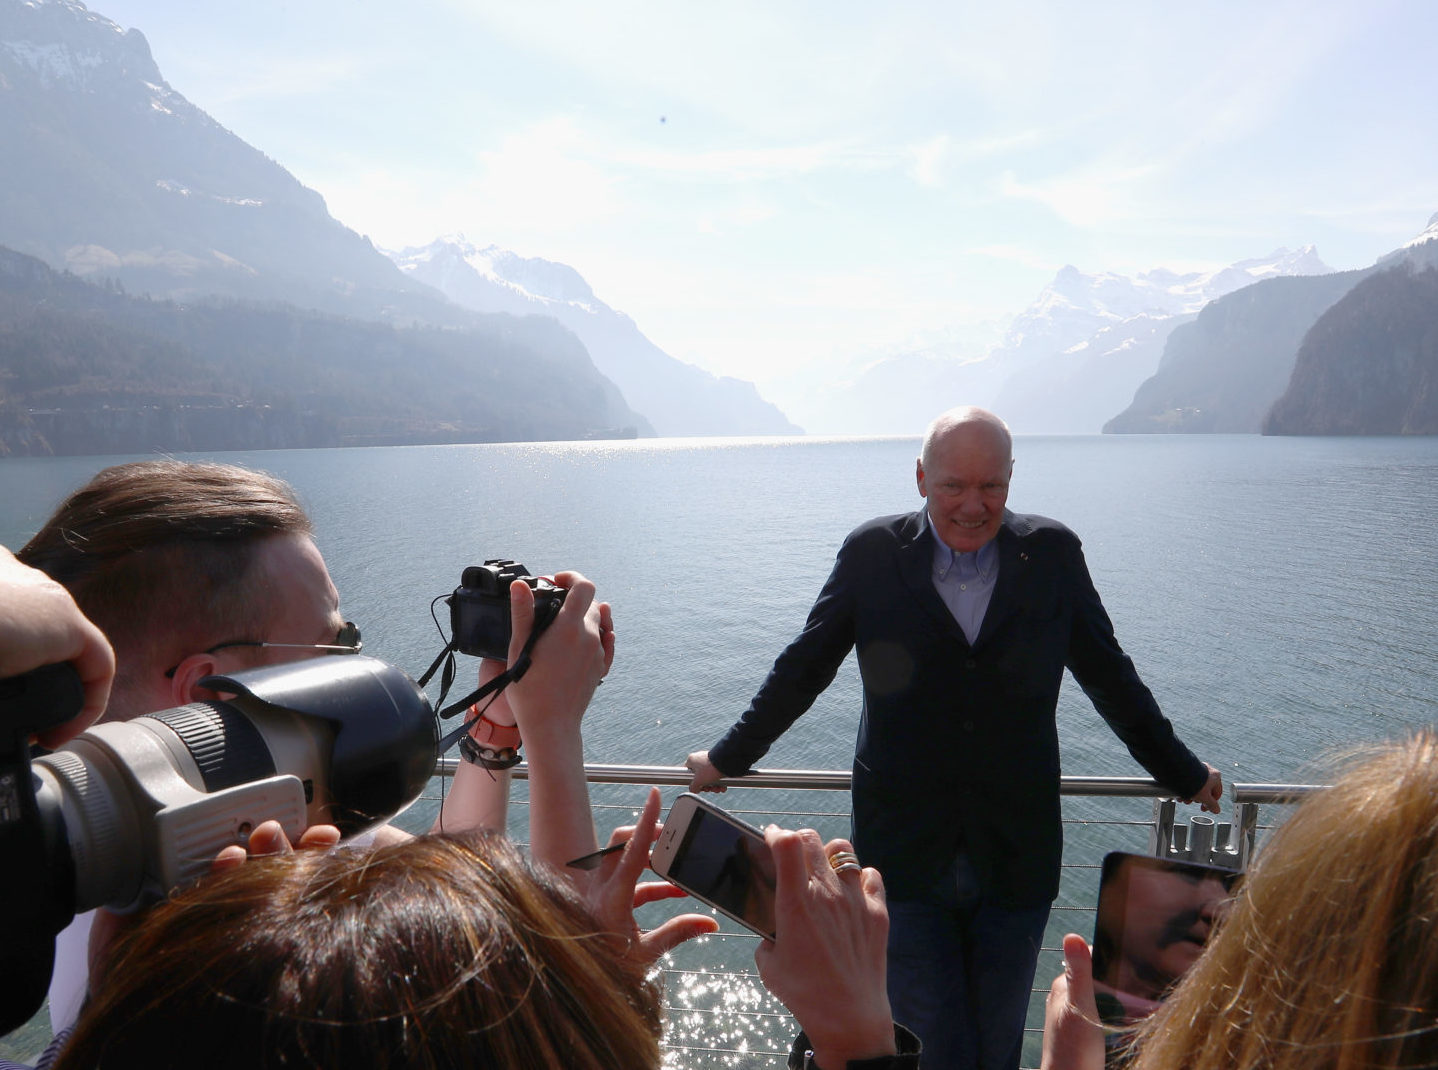 Highlights from Jean-Claude Biver's Collection on Show in Geneva